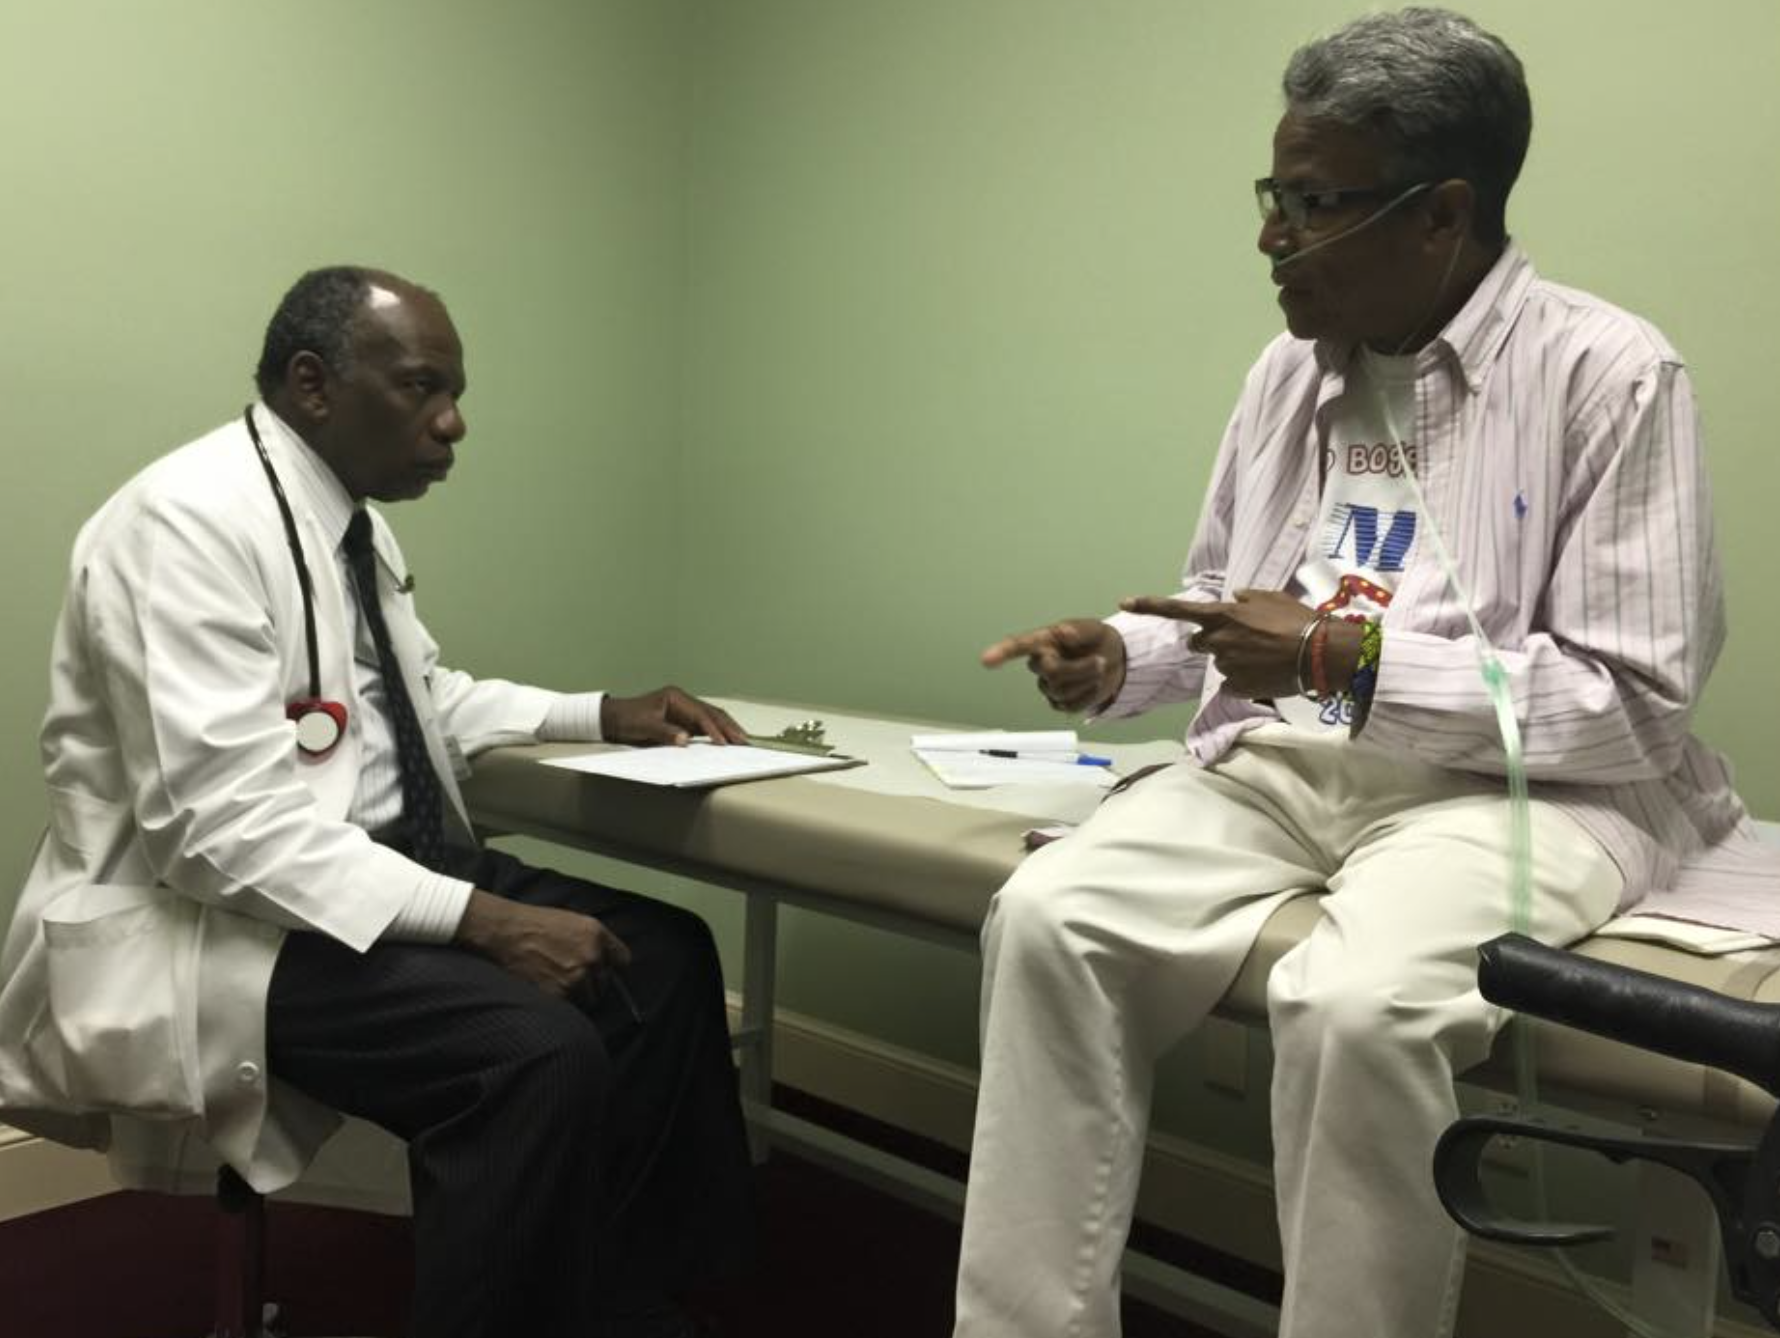 Juan Caballero (right) sits in triage and speaks with FSCDR's Hematologist, Dr. Gershwin Blyden (left). Mr. Caballero was fully dependent on oxygen at the time. This photo was taken February 27, 2015.